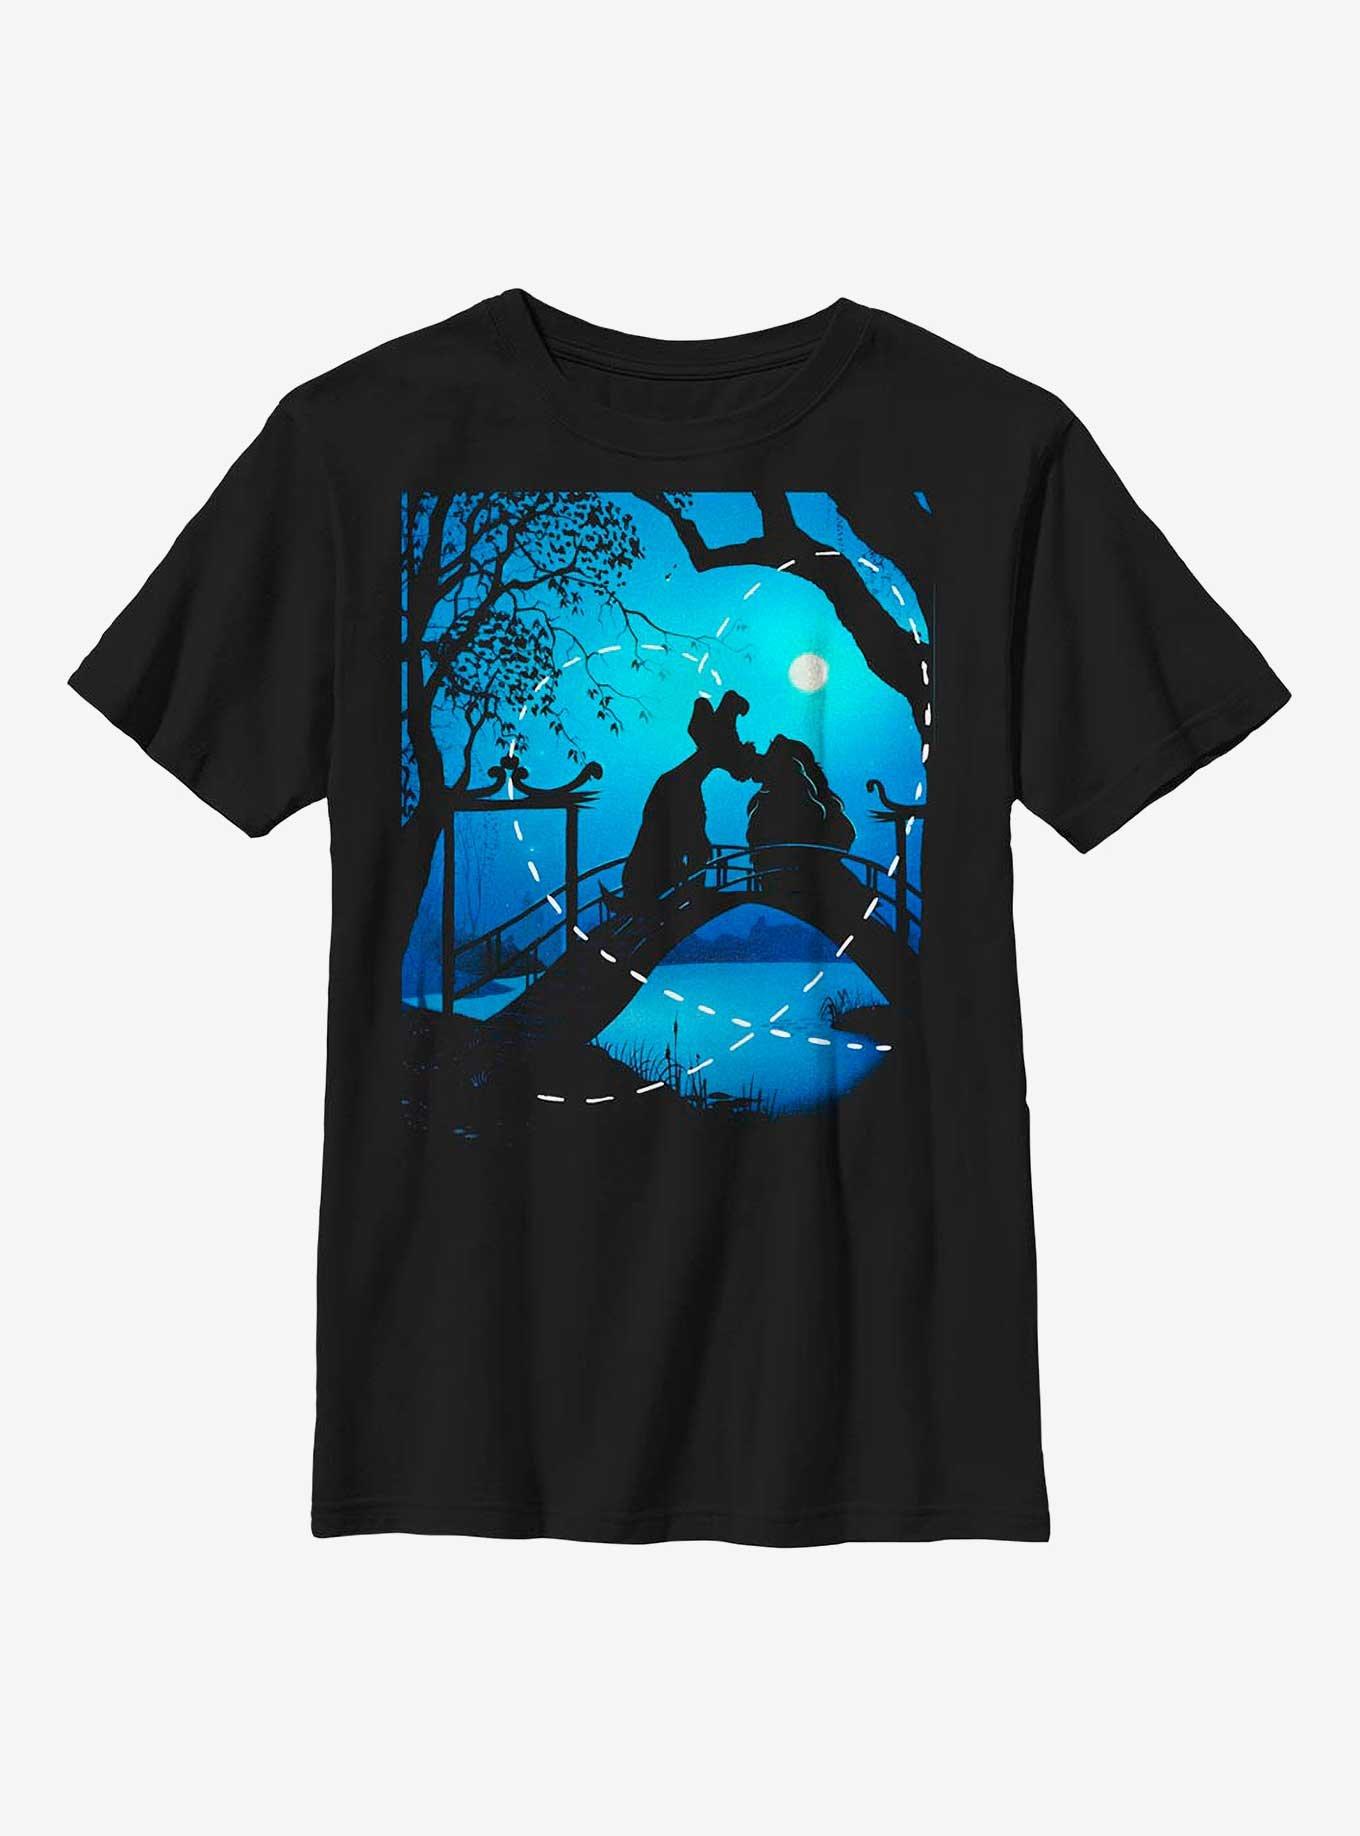 Disney Lady And The Tramp Silhouette Love Youth T-Shirt, BLACK, hi-res